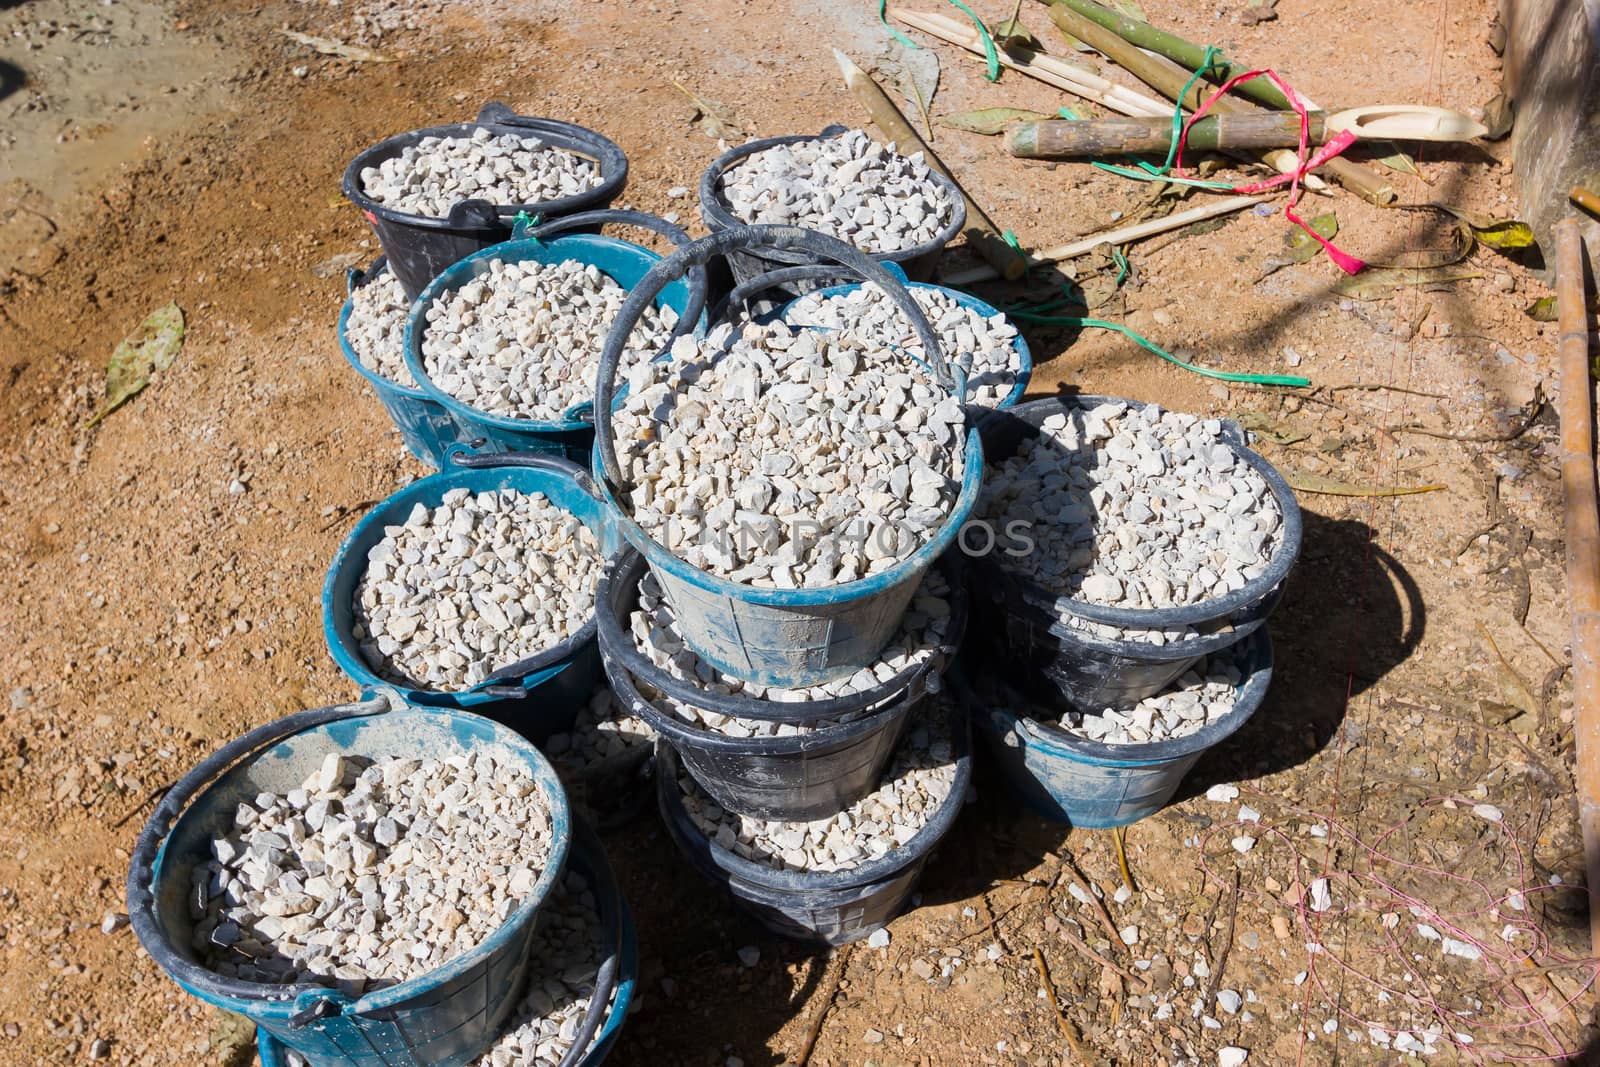 pebbles in many buckets prepared for mixing cement or concrete in construction site, horizontal photo.